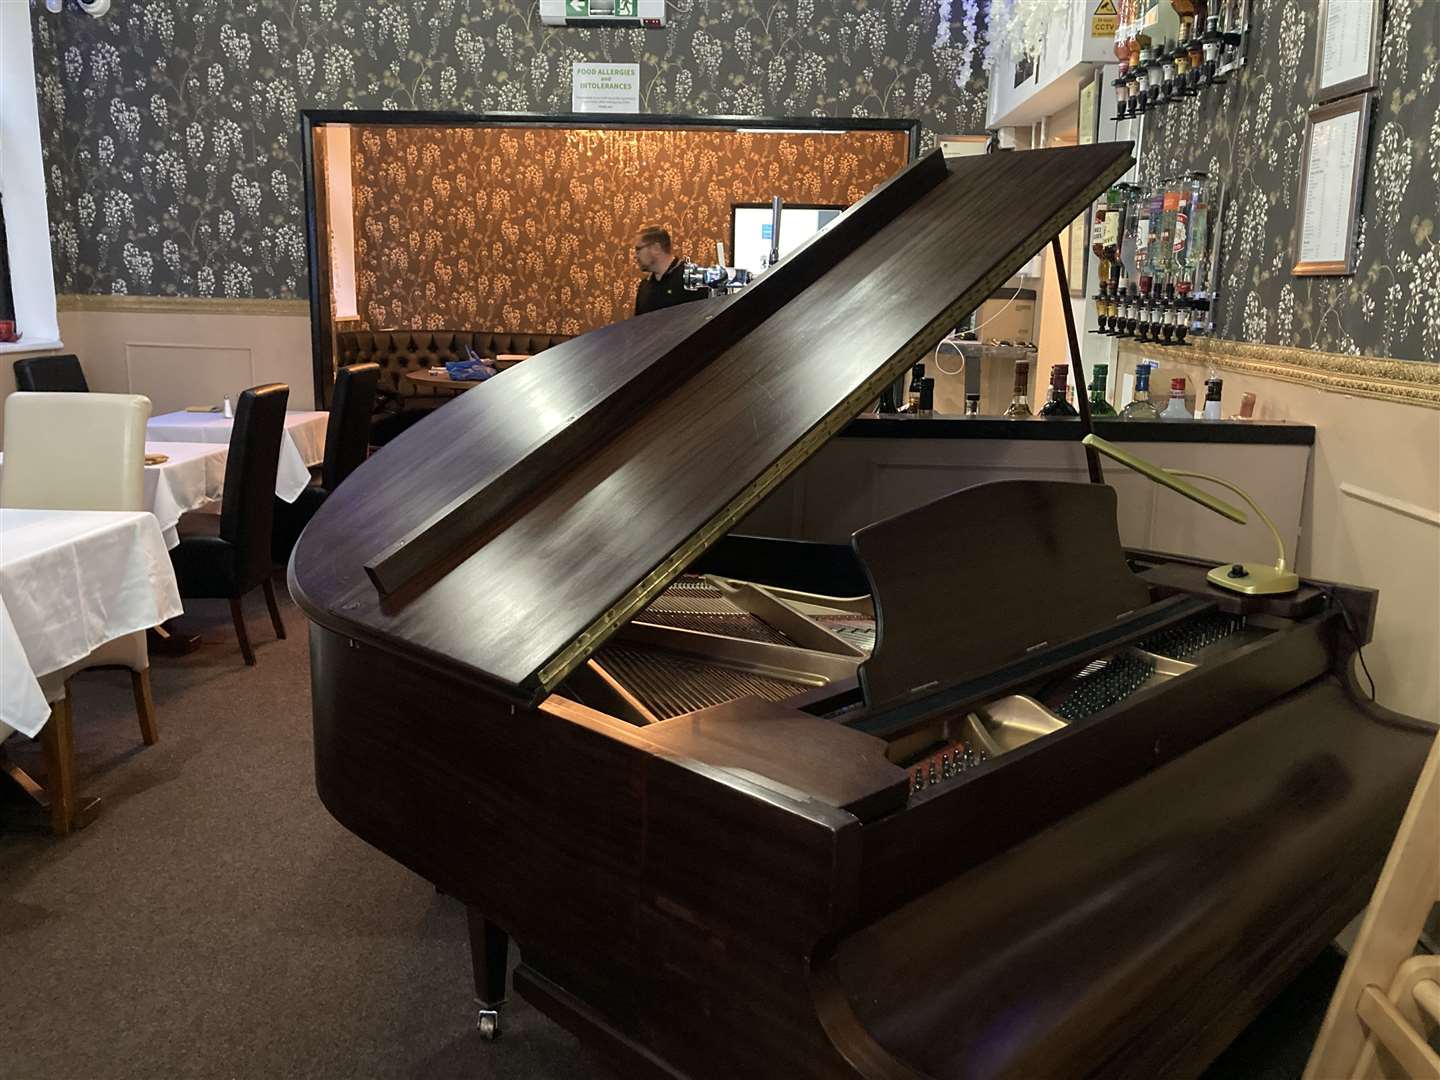 Babygrand piano in Carlyle's Restaurant in Rose Street, Sheerness. Picture: John Nurden (62093416)